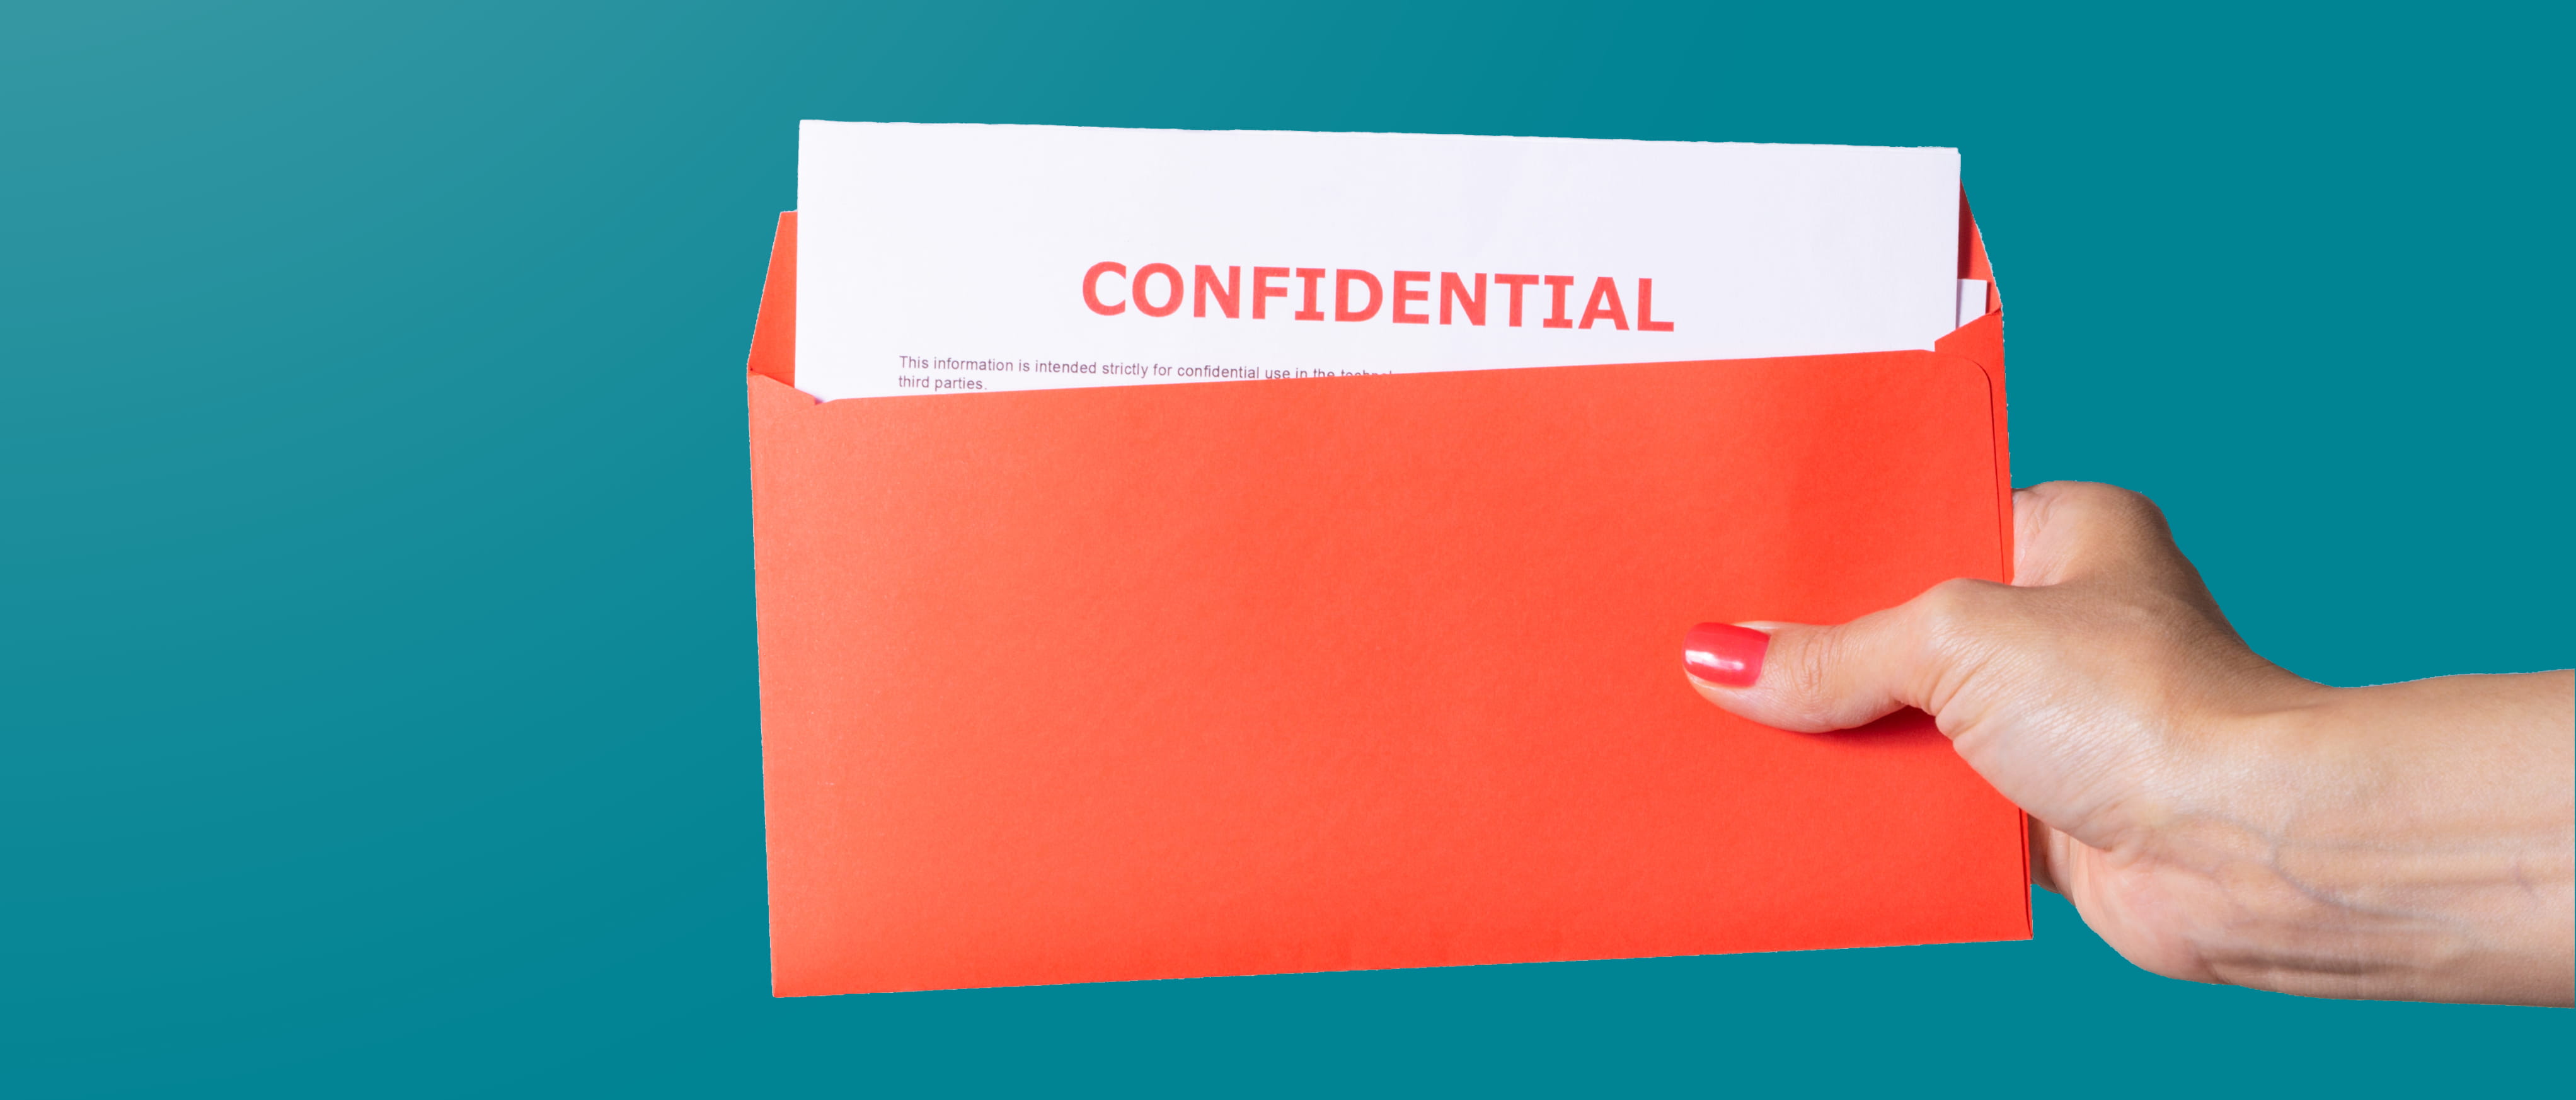 a hand from outside of the frame holding a coral coloured envelop with white documents inside with the words confidential in red written at the top, all against a solid teal background